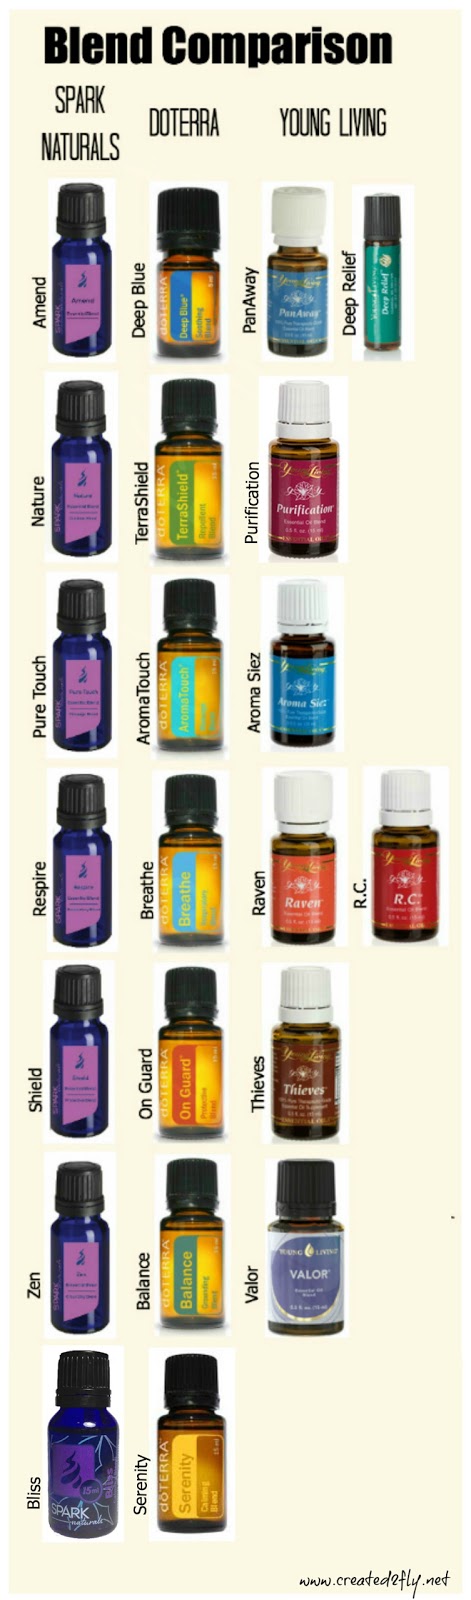 spark-comparisons-to-doterra-and-young-living-jenni-raincloud